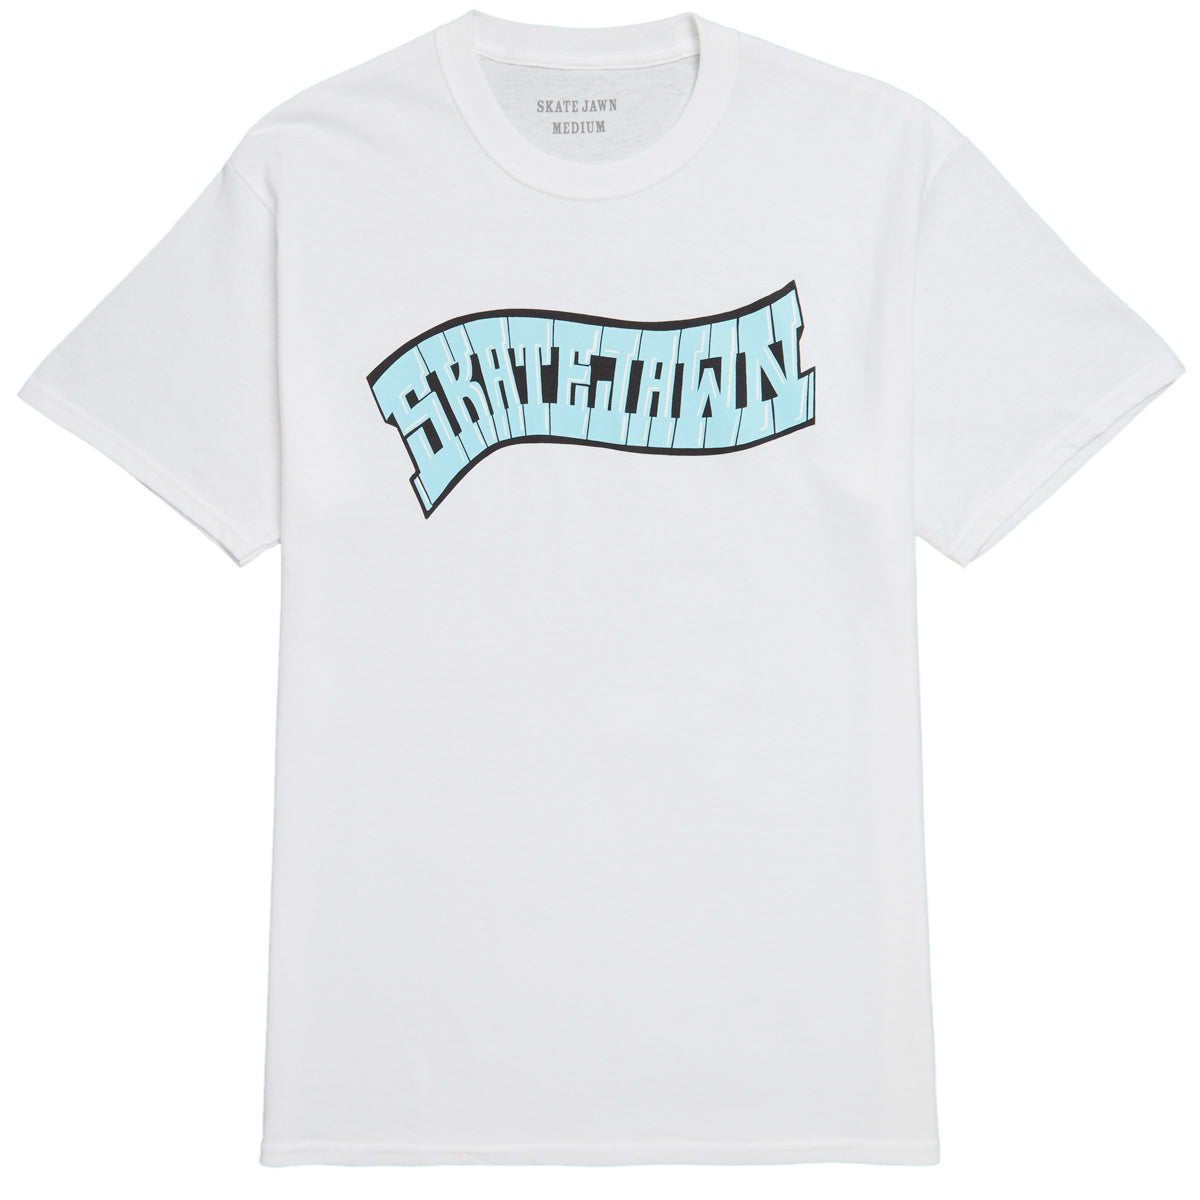 Skate Jawn Funky Piano T-Shirt - White image 1